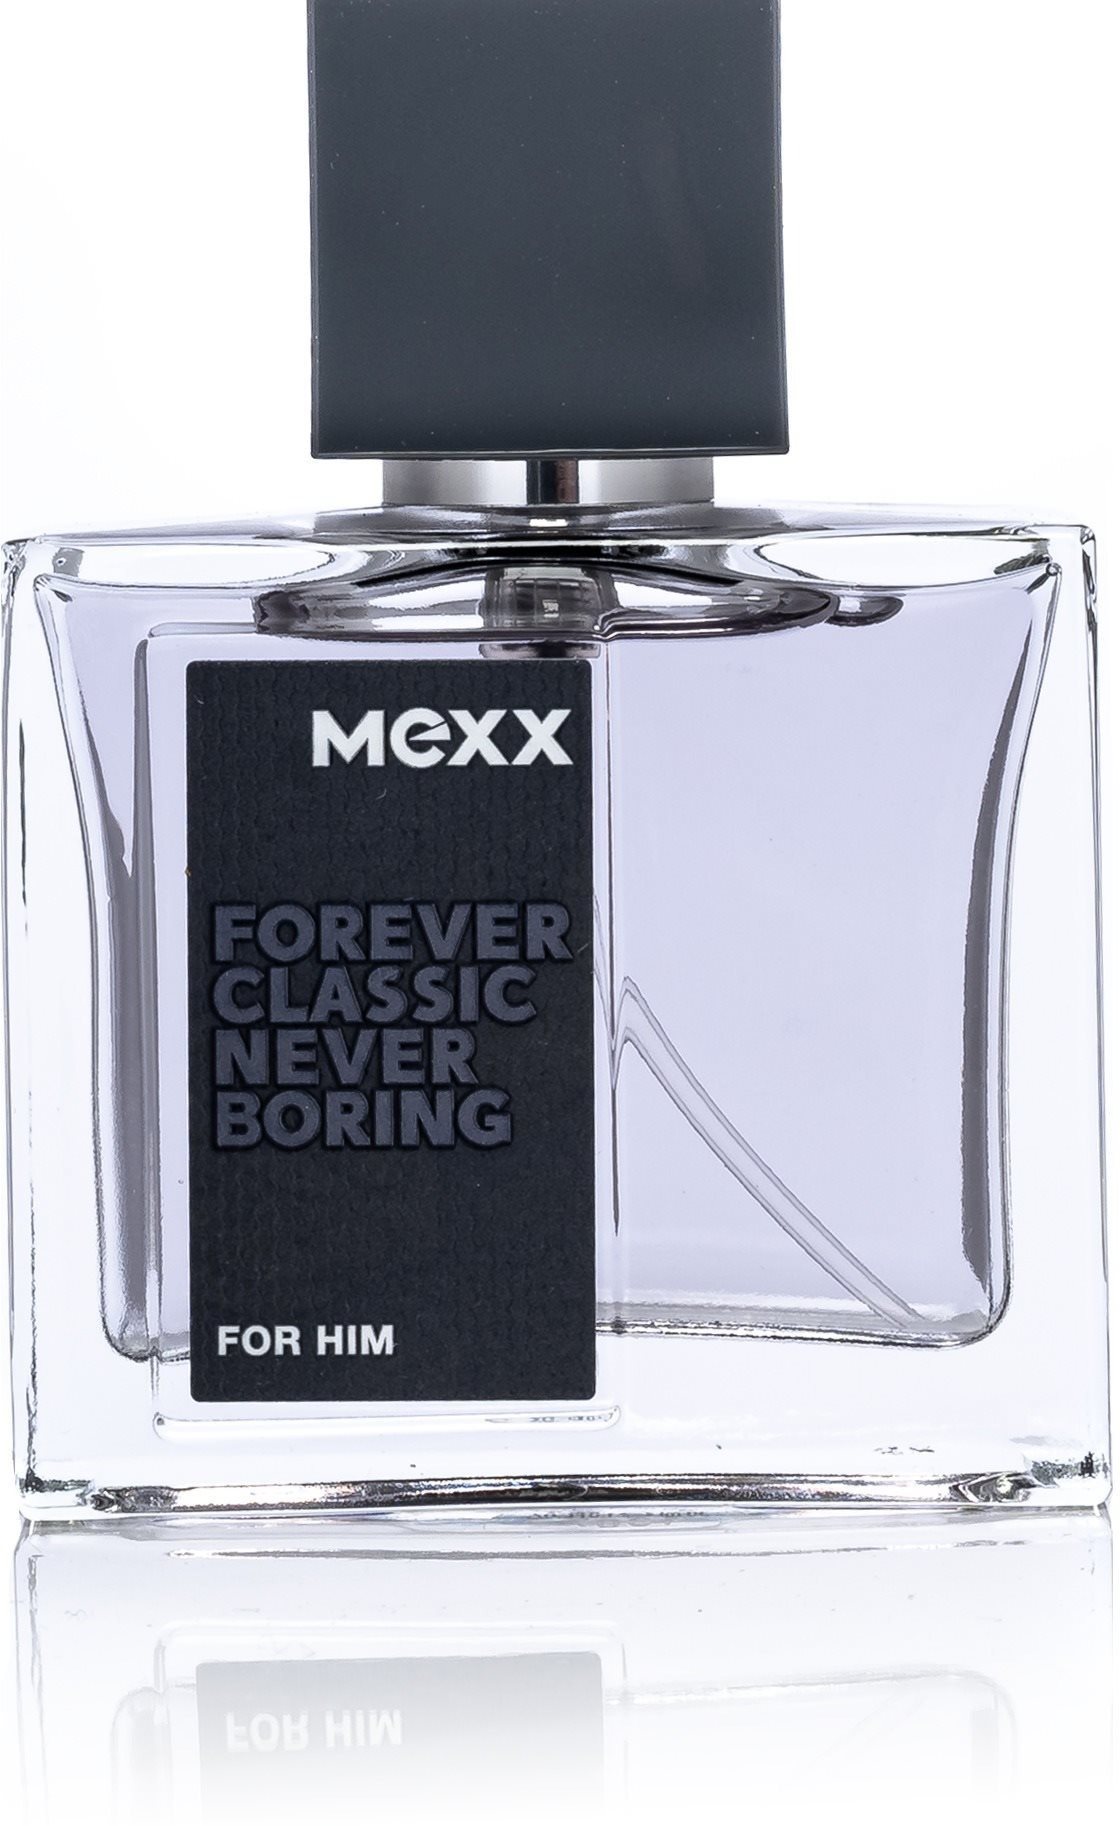 MEXX Forever Classic Never Boring for Him EdT